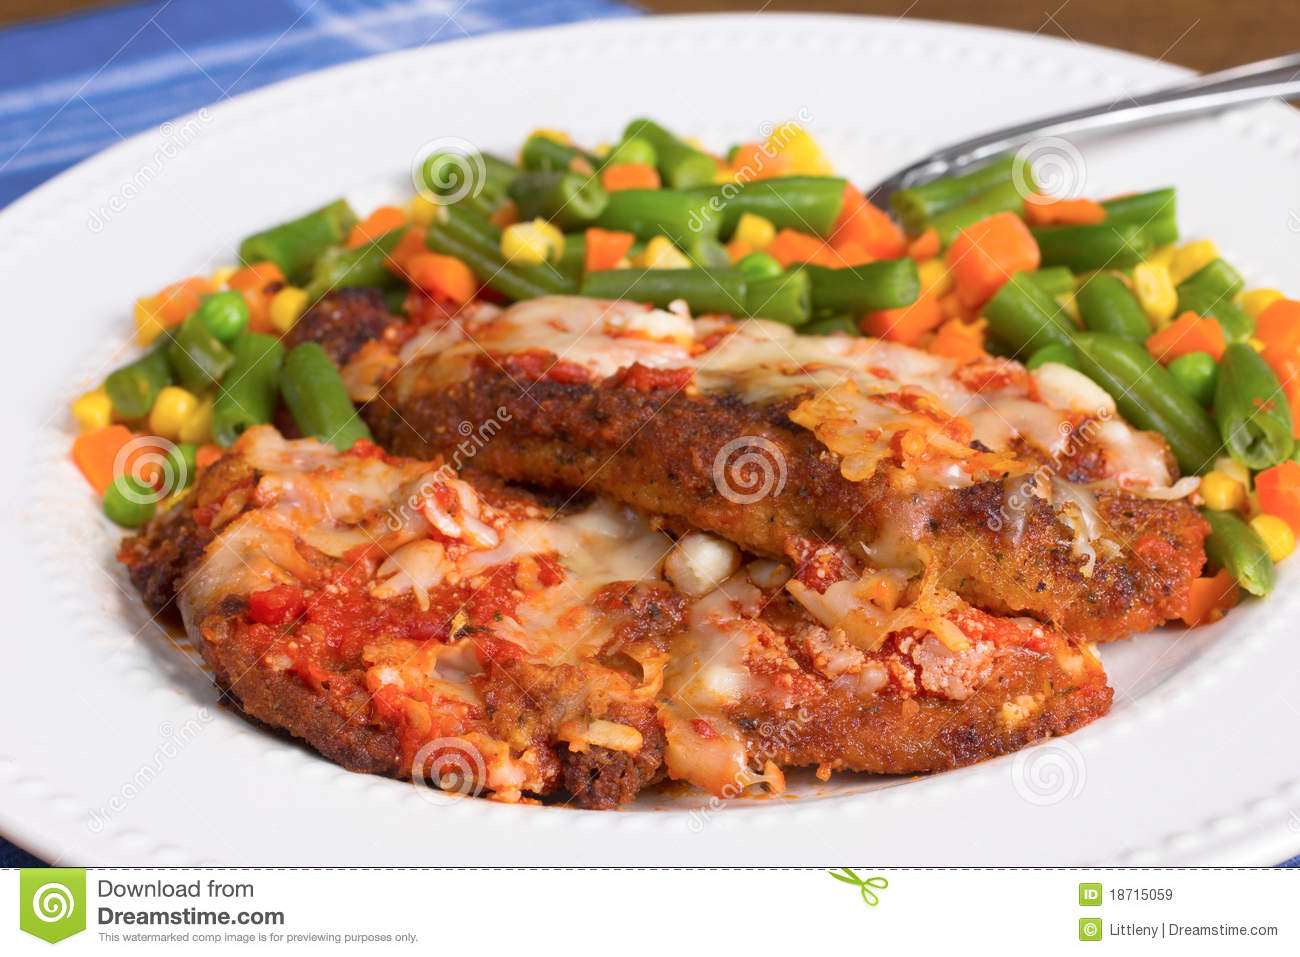 Chicken Parmesan Royalty Free Stock Images   Image  18715059